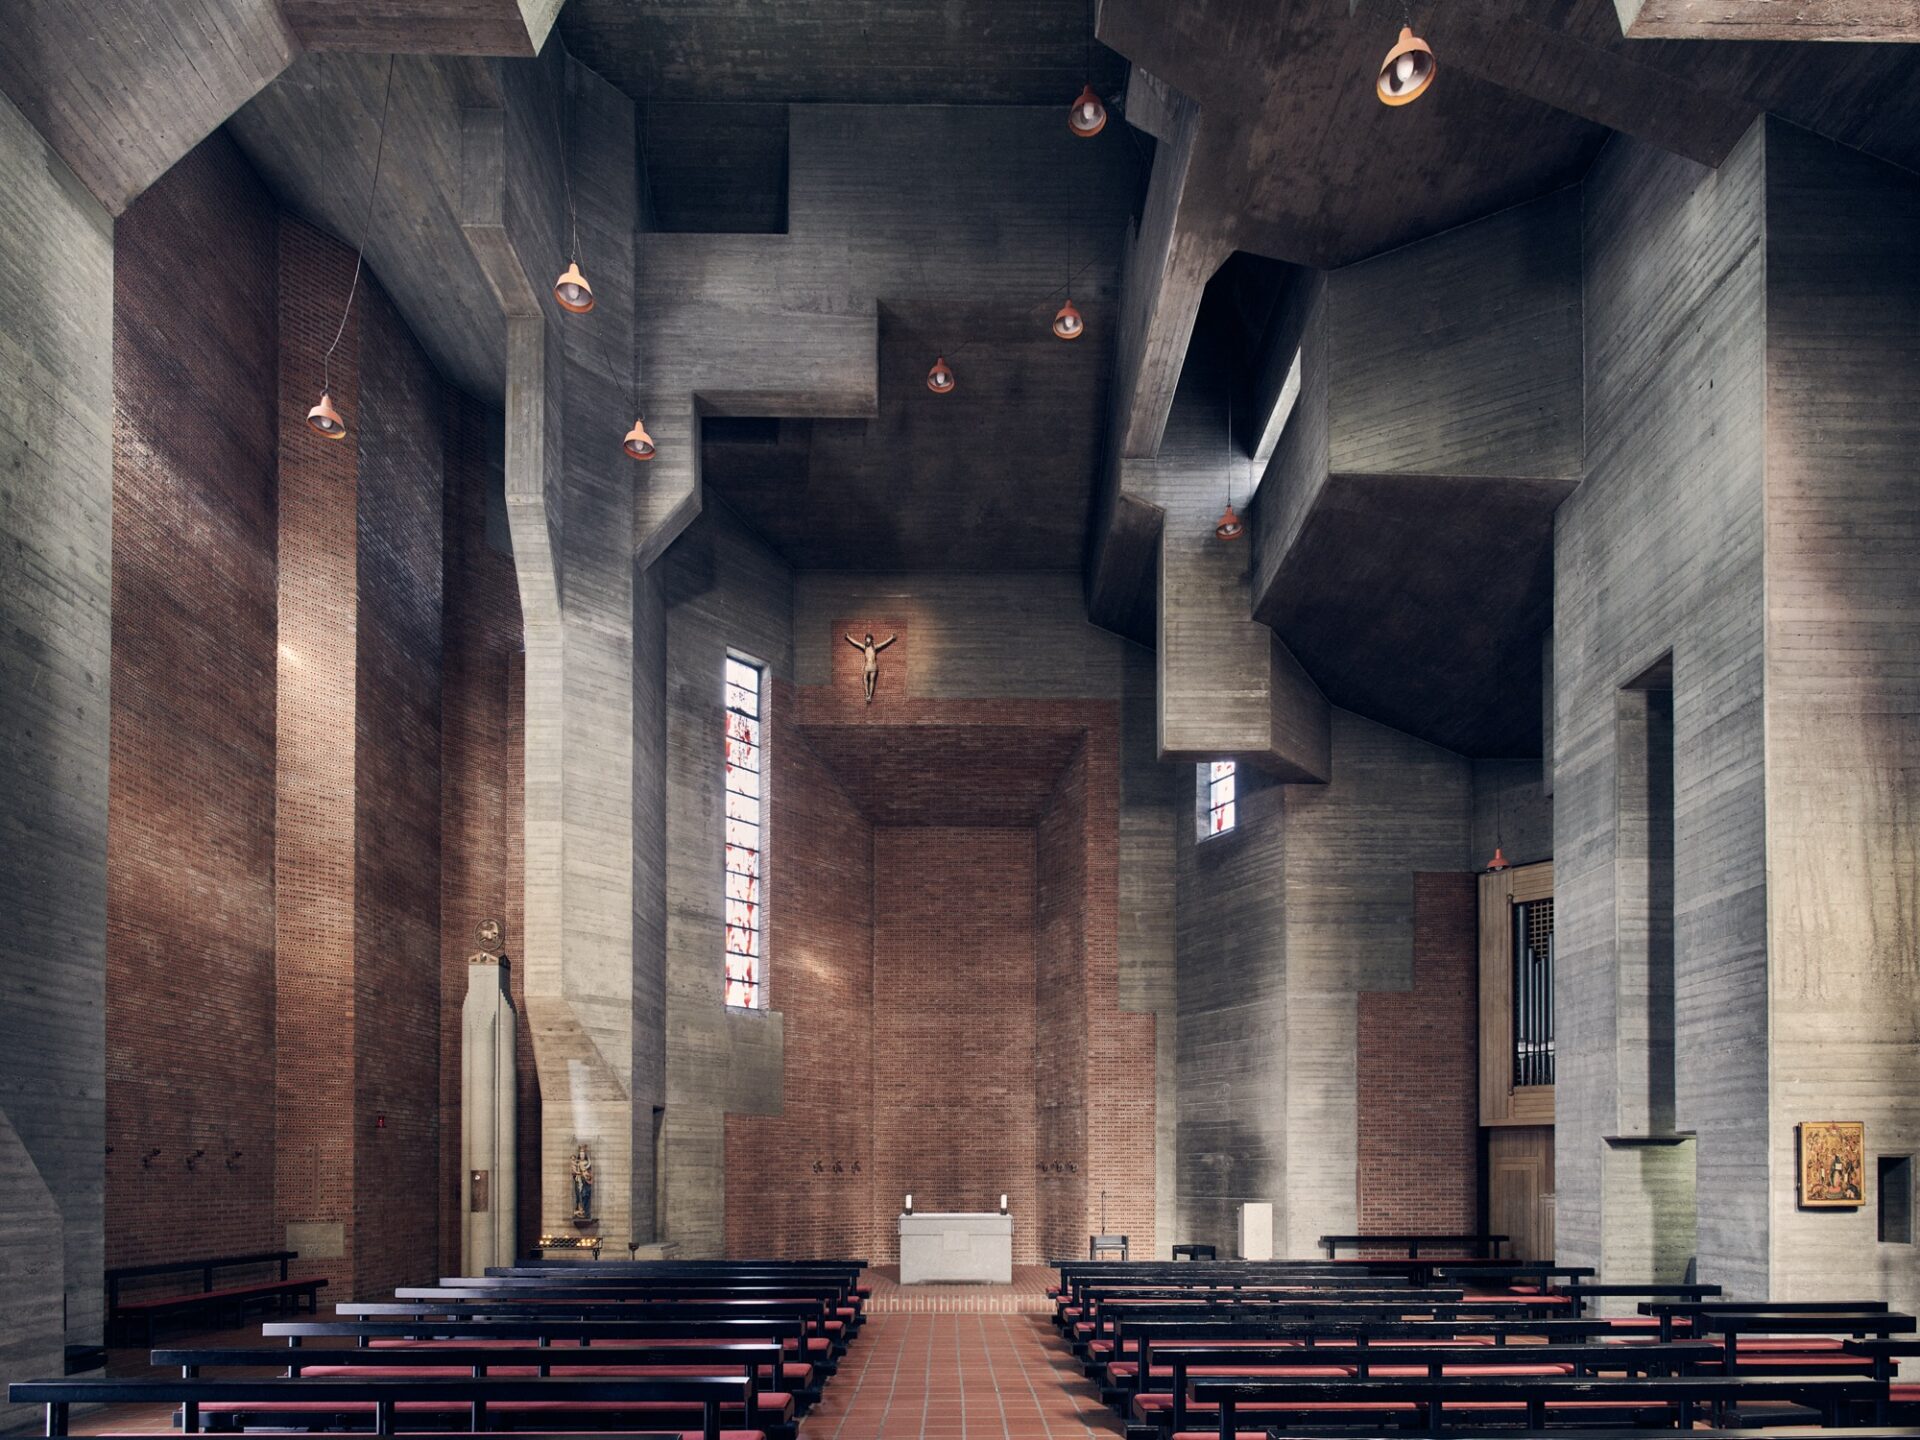 an interior overview of a large brutalist church with angular concrete walls, soft light, and wooden pews